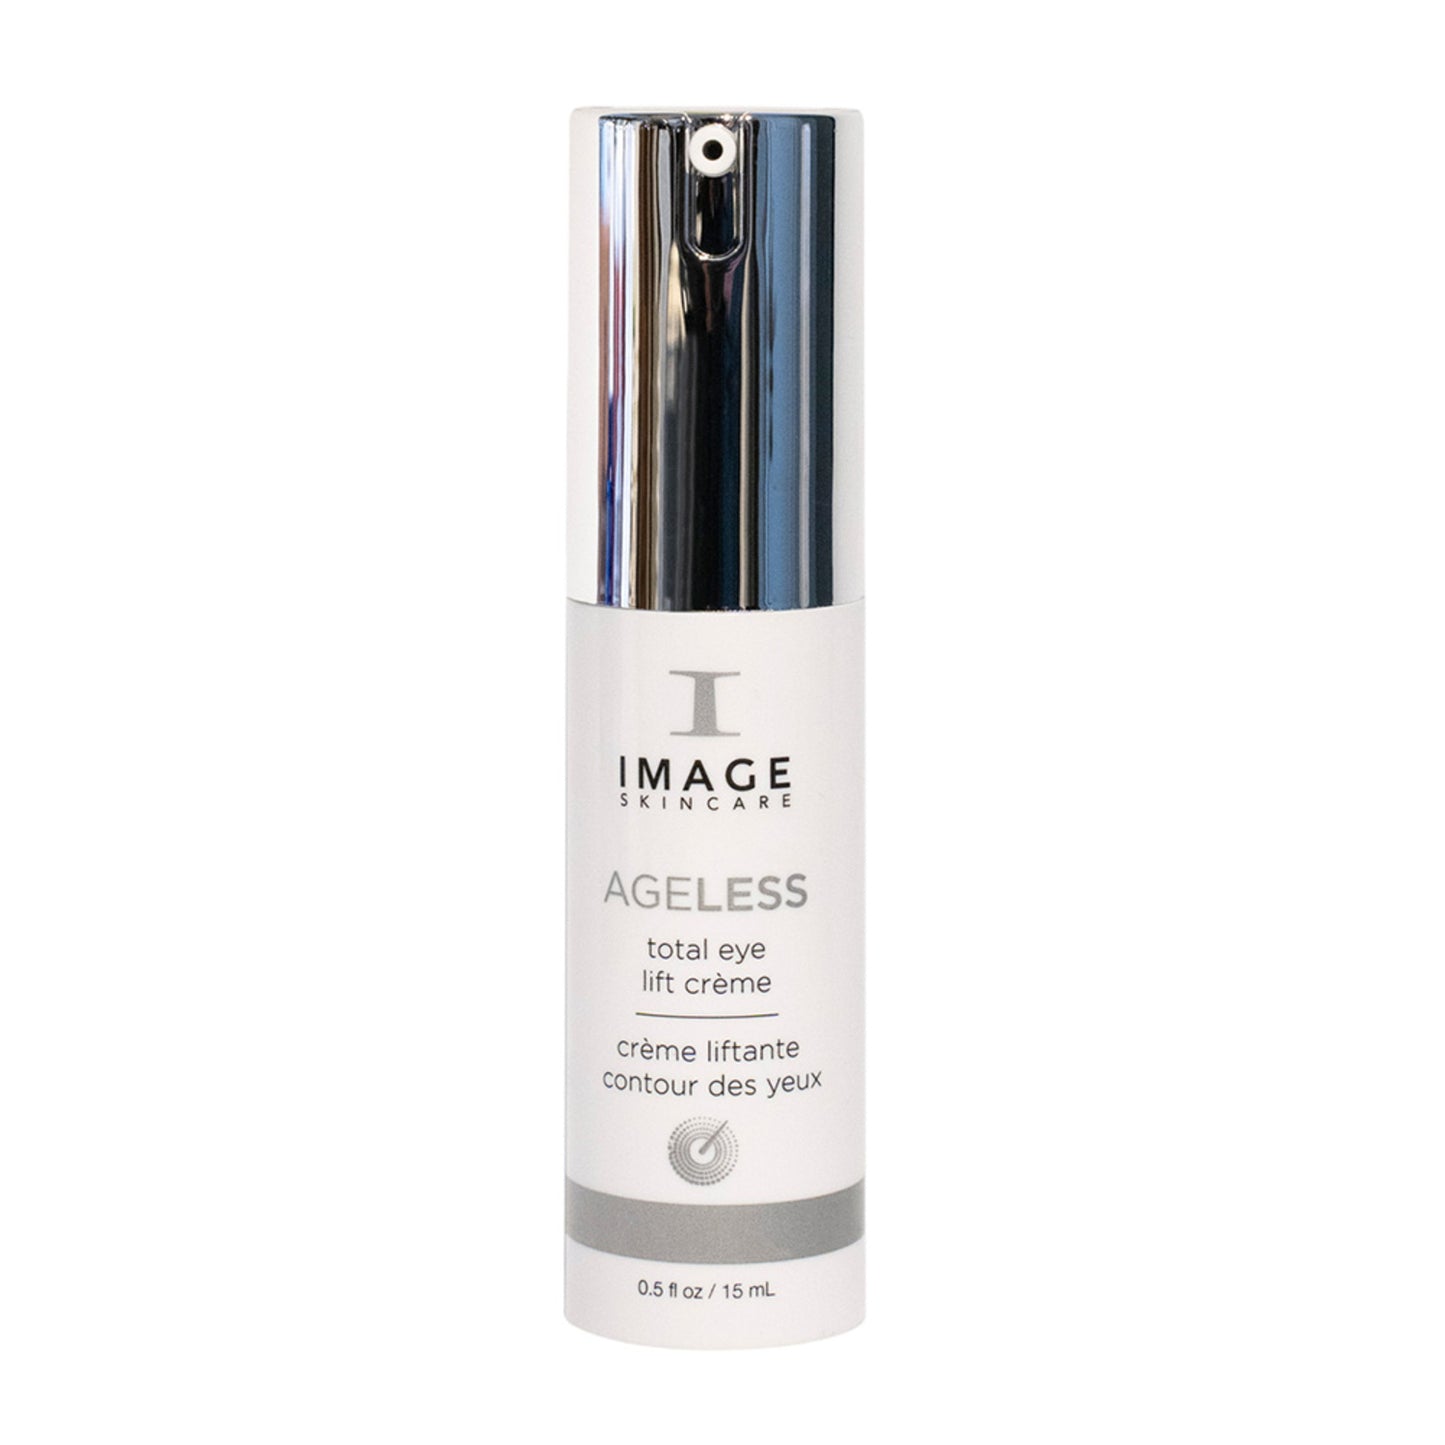 Image Skincare Ageless Total Eye Lift Creme with SCT